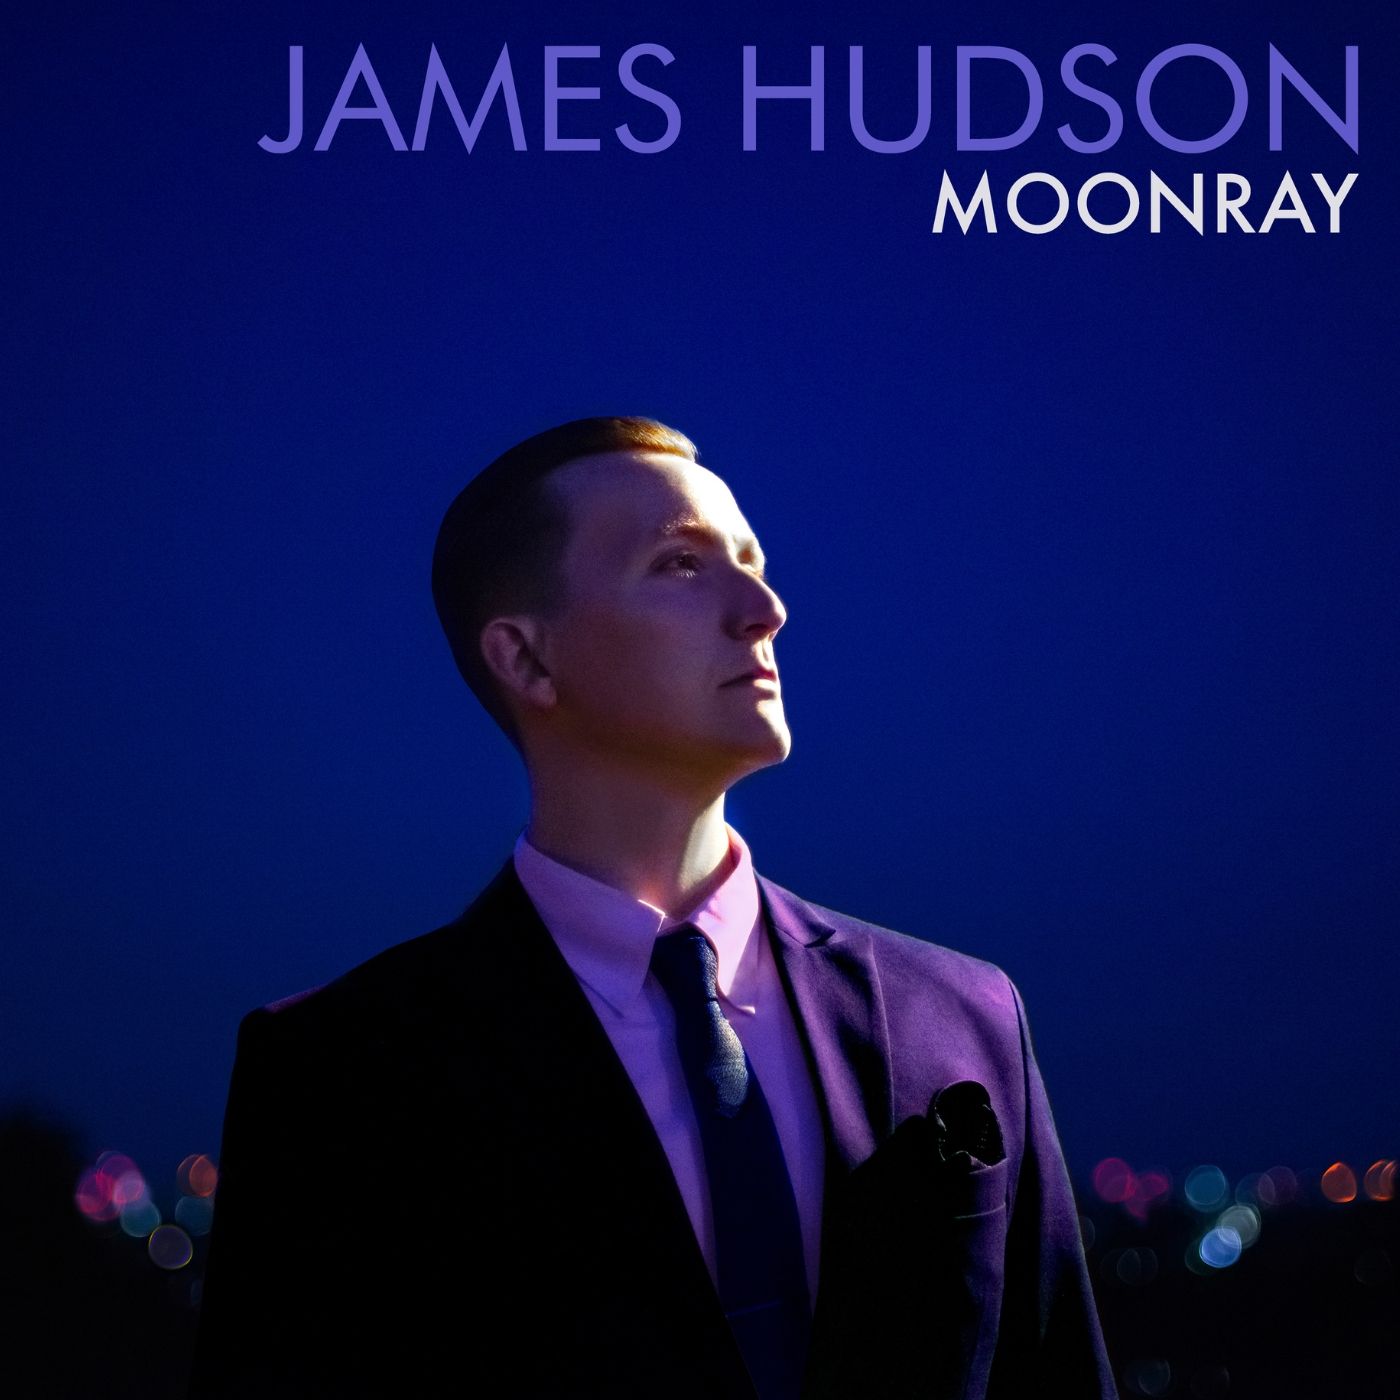 A man in a suit and tie is on the cover of james hudson moonray